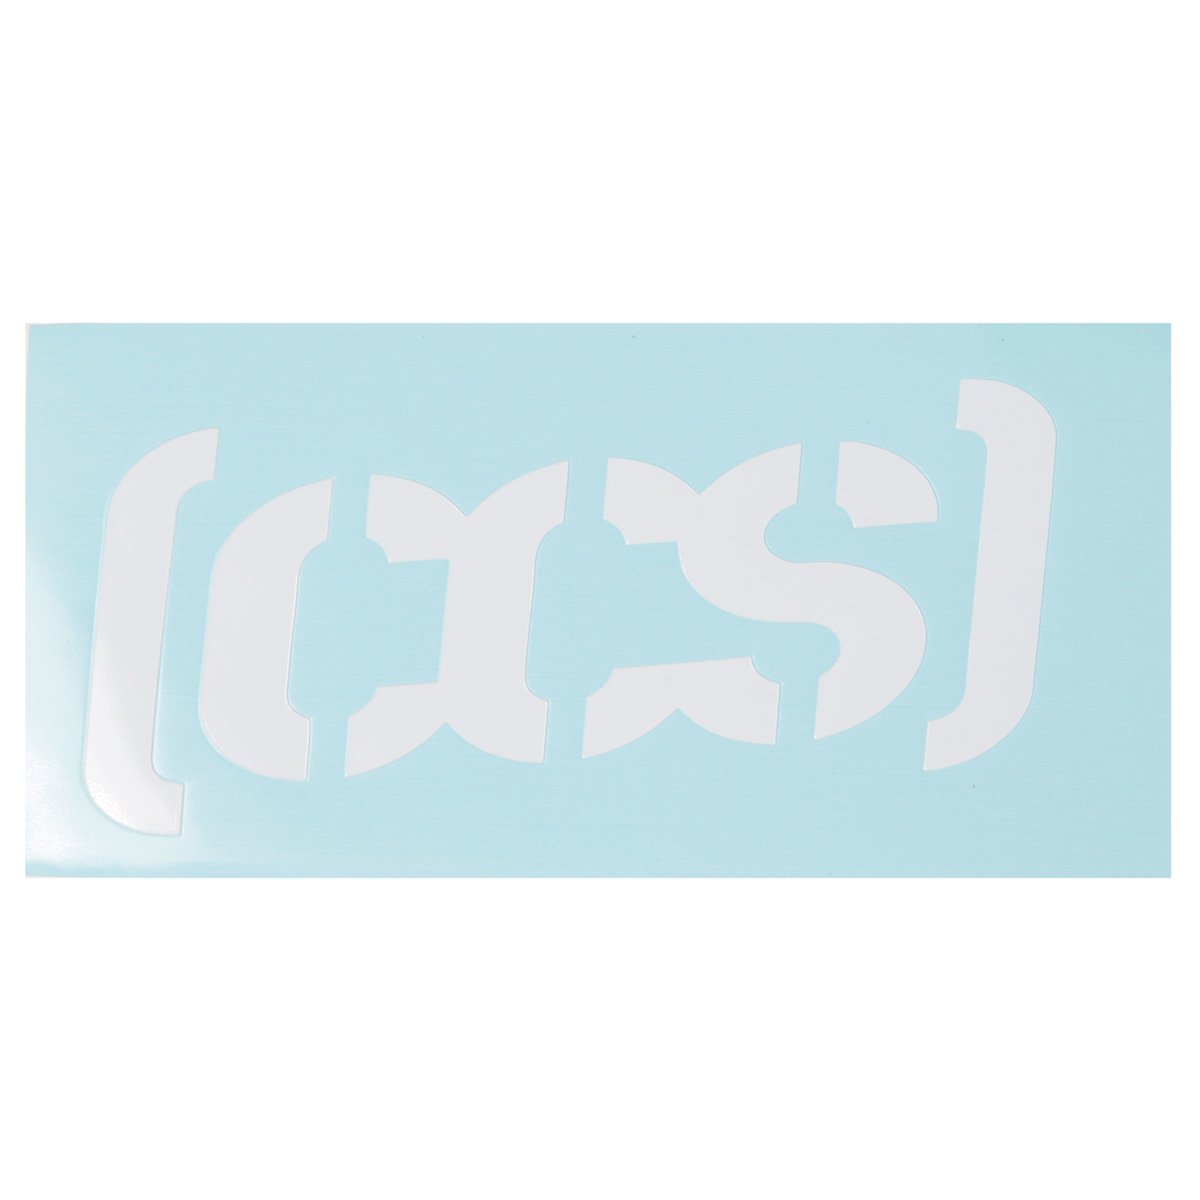 CCS Decal Sticker - White image 1